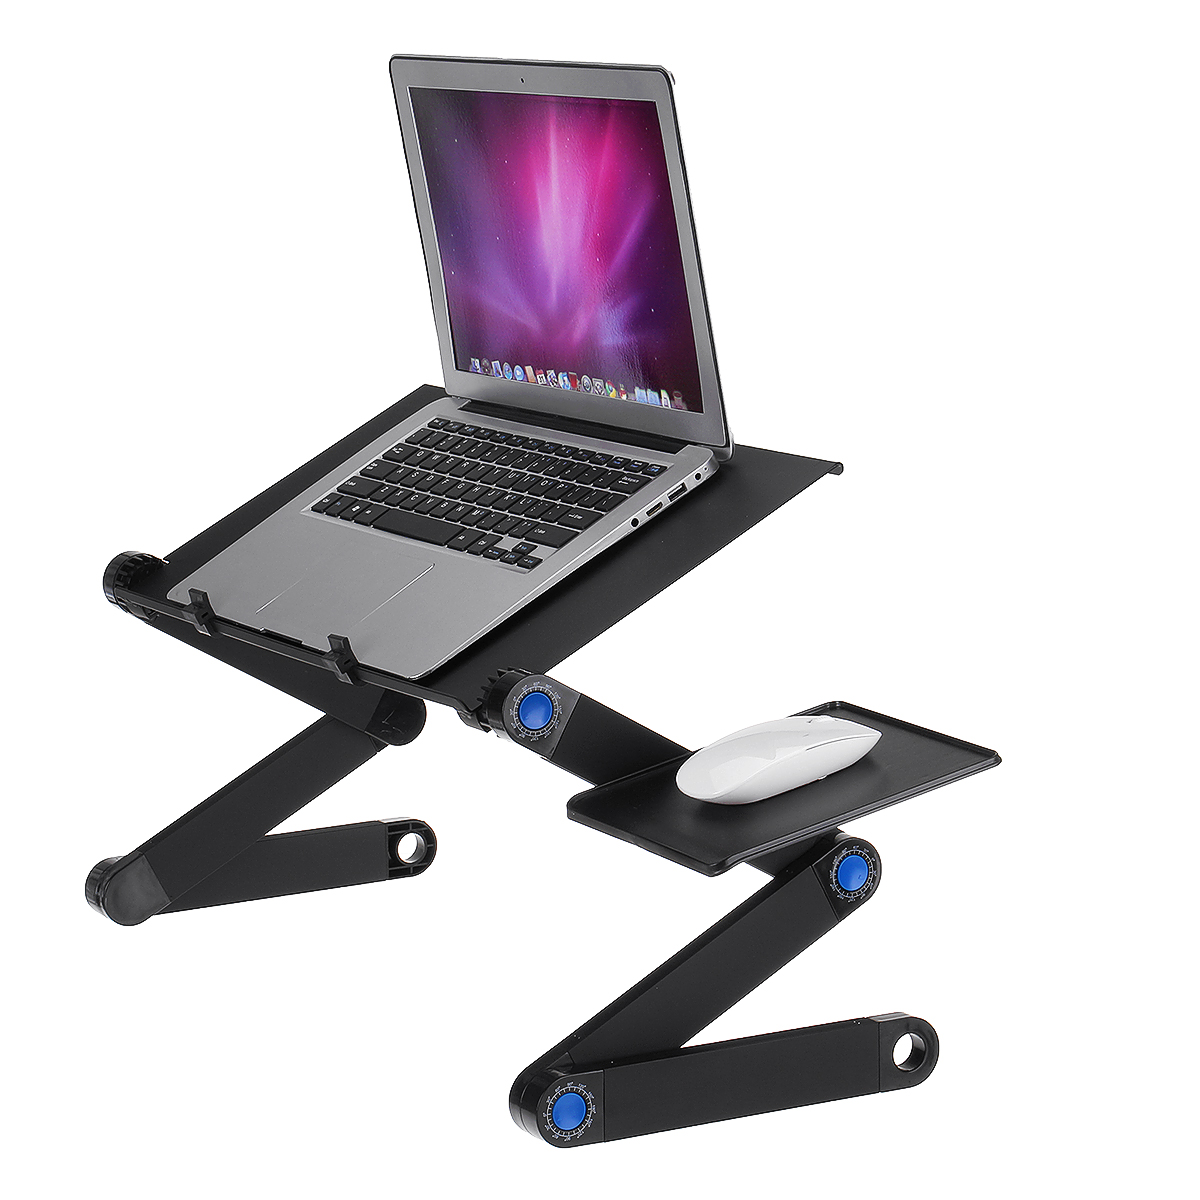 Cooling-Laptop-Desk-360-Degree-Aluminum-Alloy-Adjustable-Foldable-Cooling-Notebook-Table-for-Sofa-Be-1786133-11